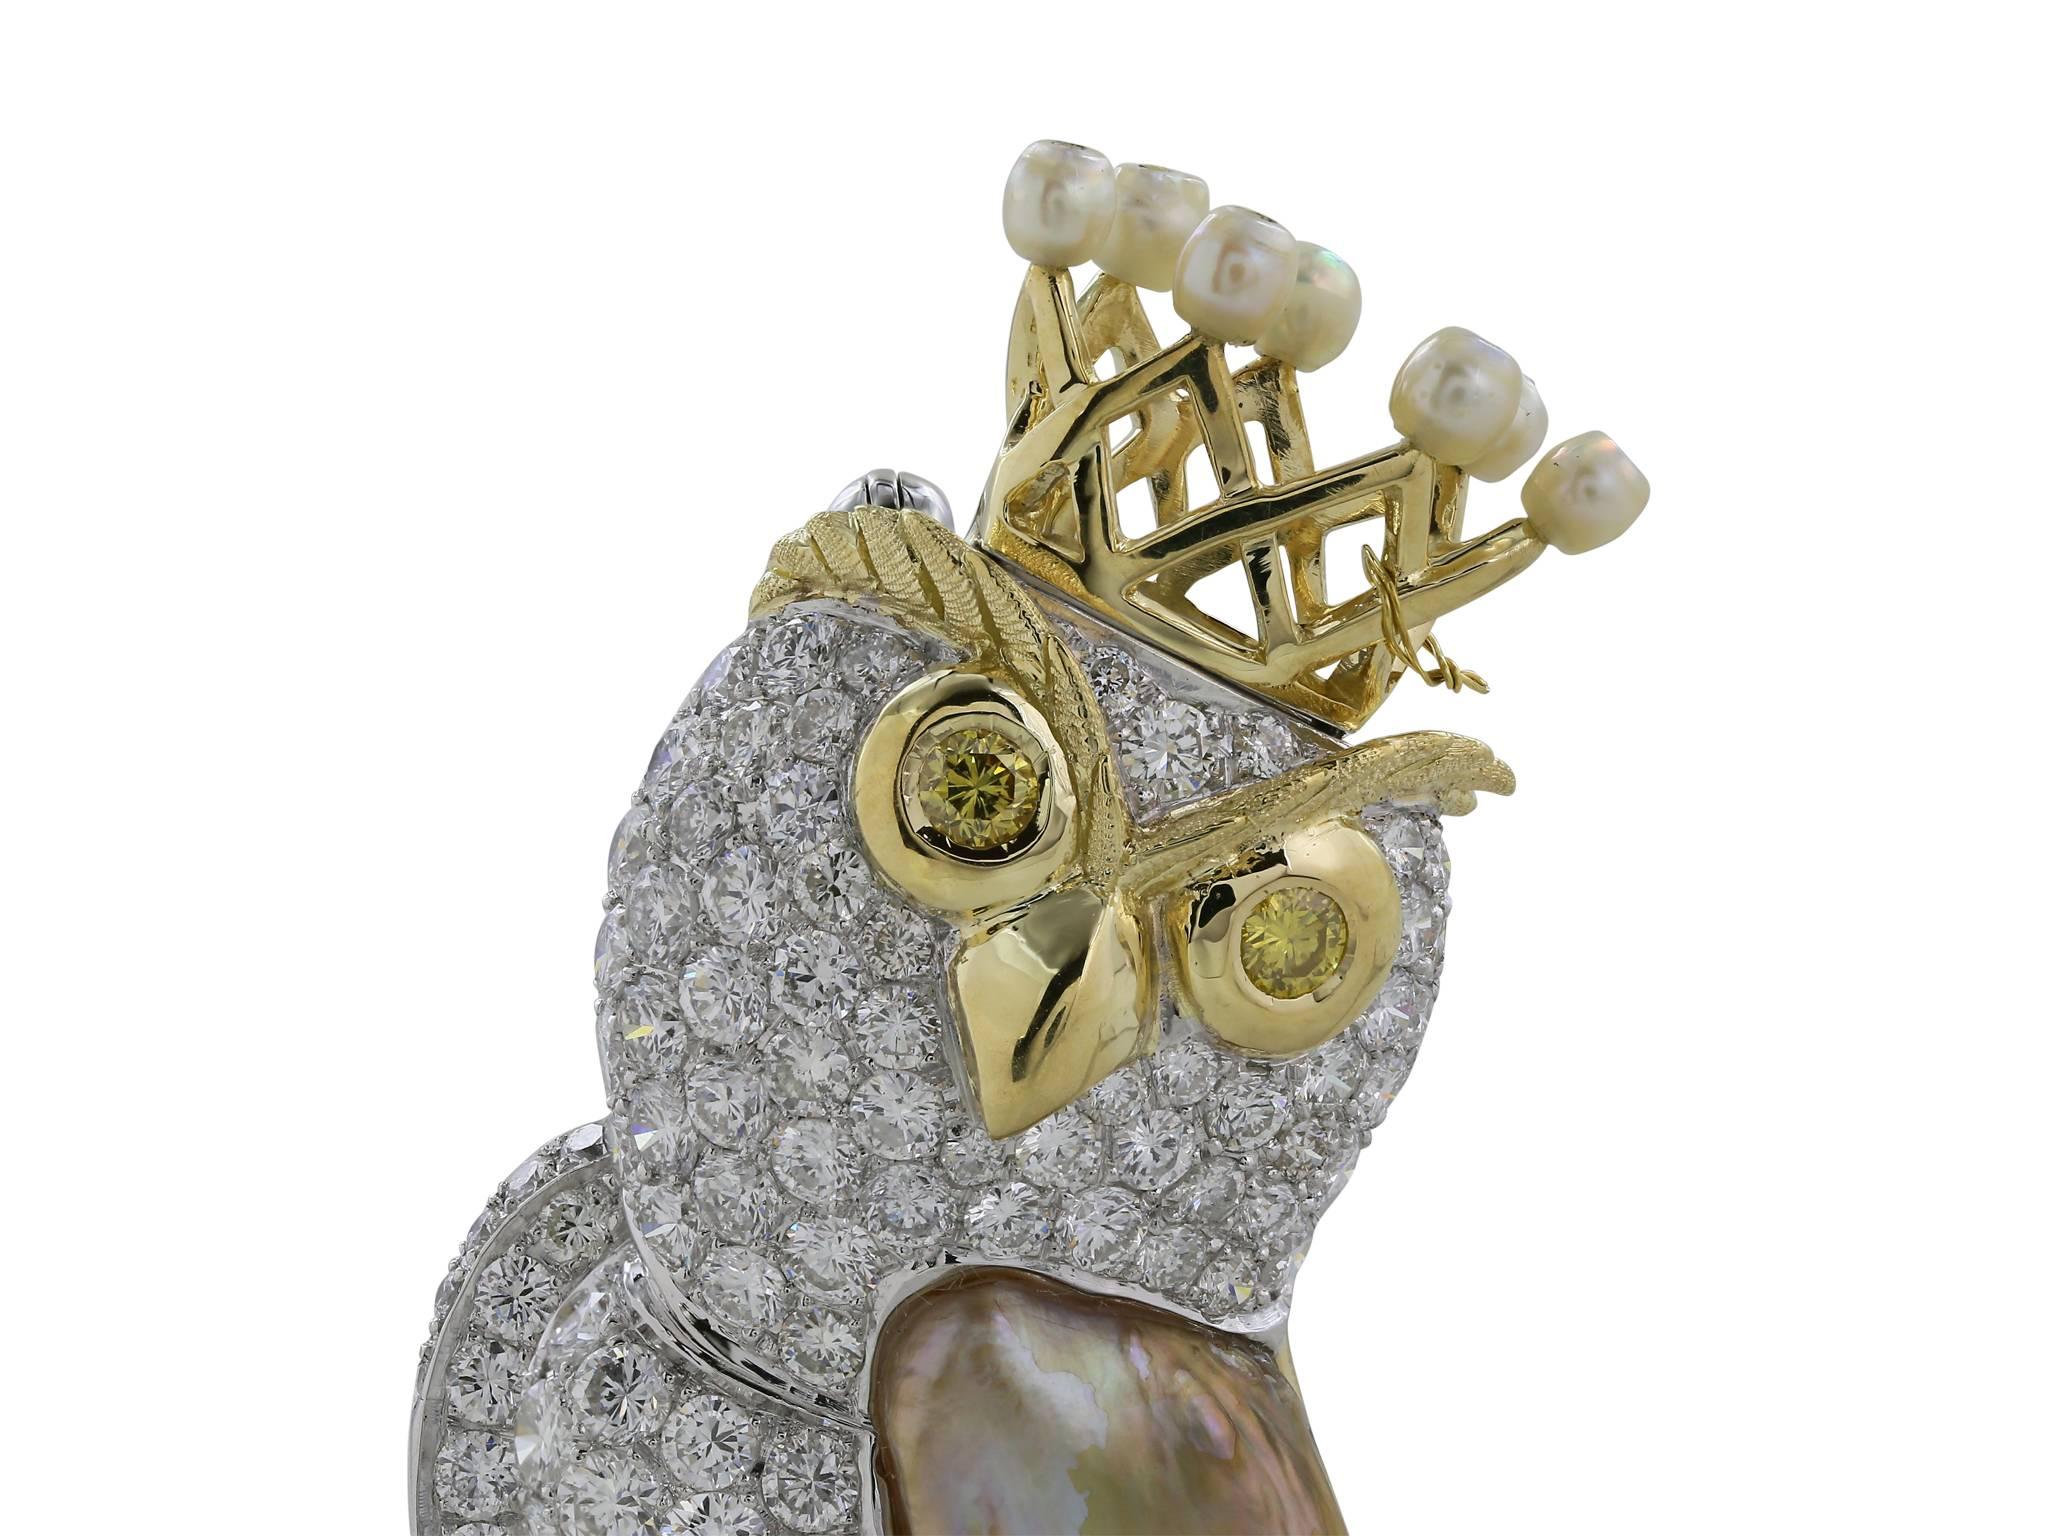 Vintage owl pin with approximately 1.50 carats of round brilliant diamonds, with 7 pearls gracing the crown, a hand carved mother of pearl wing, and two round yellow diamonds for the eyes, set in 18 karat white and yellow gold.